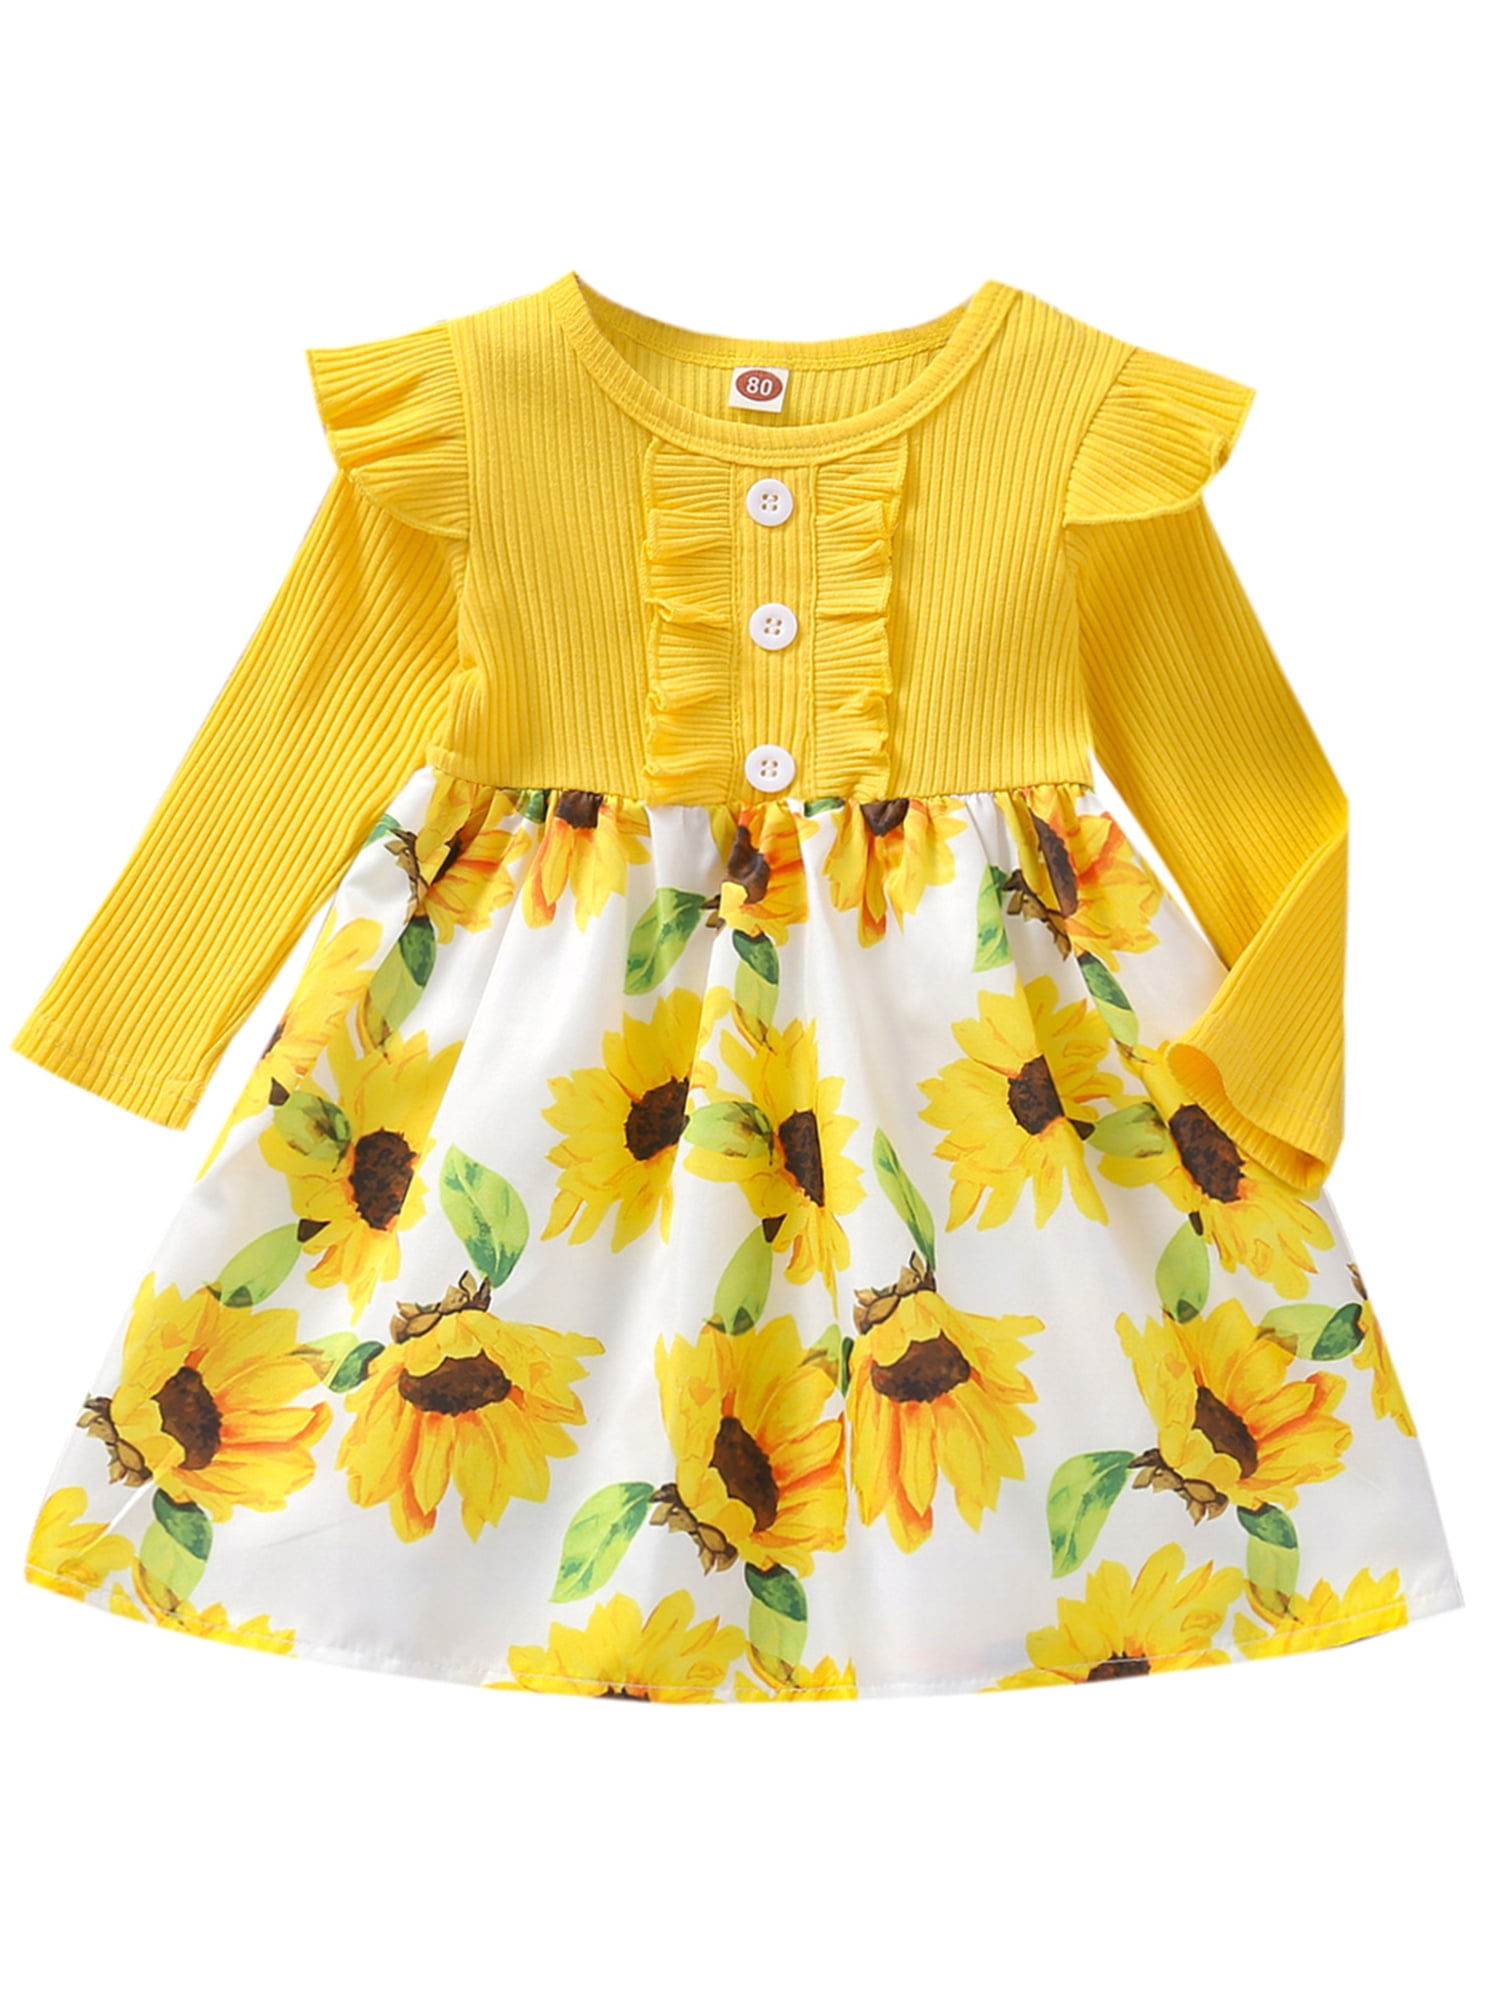 Toddler Baby Girls Long Sleeve Floral Flower Print Dress Outfits Clothes